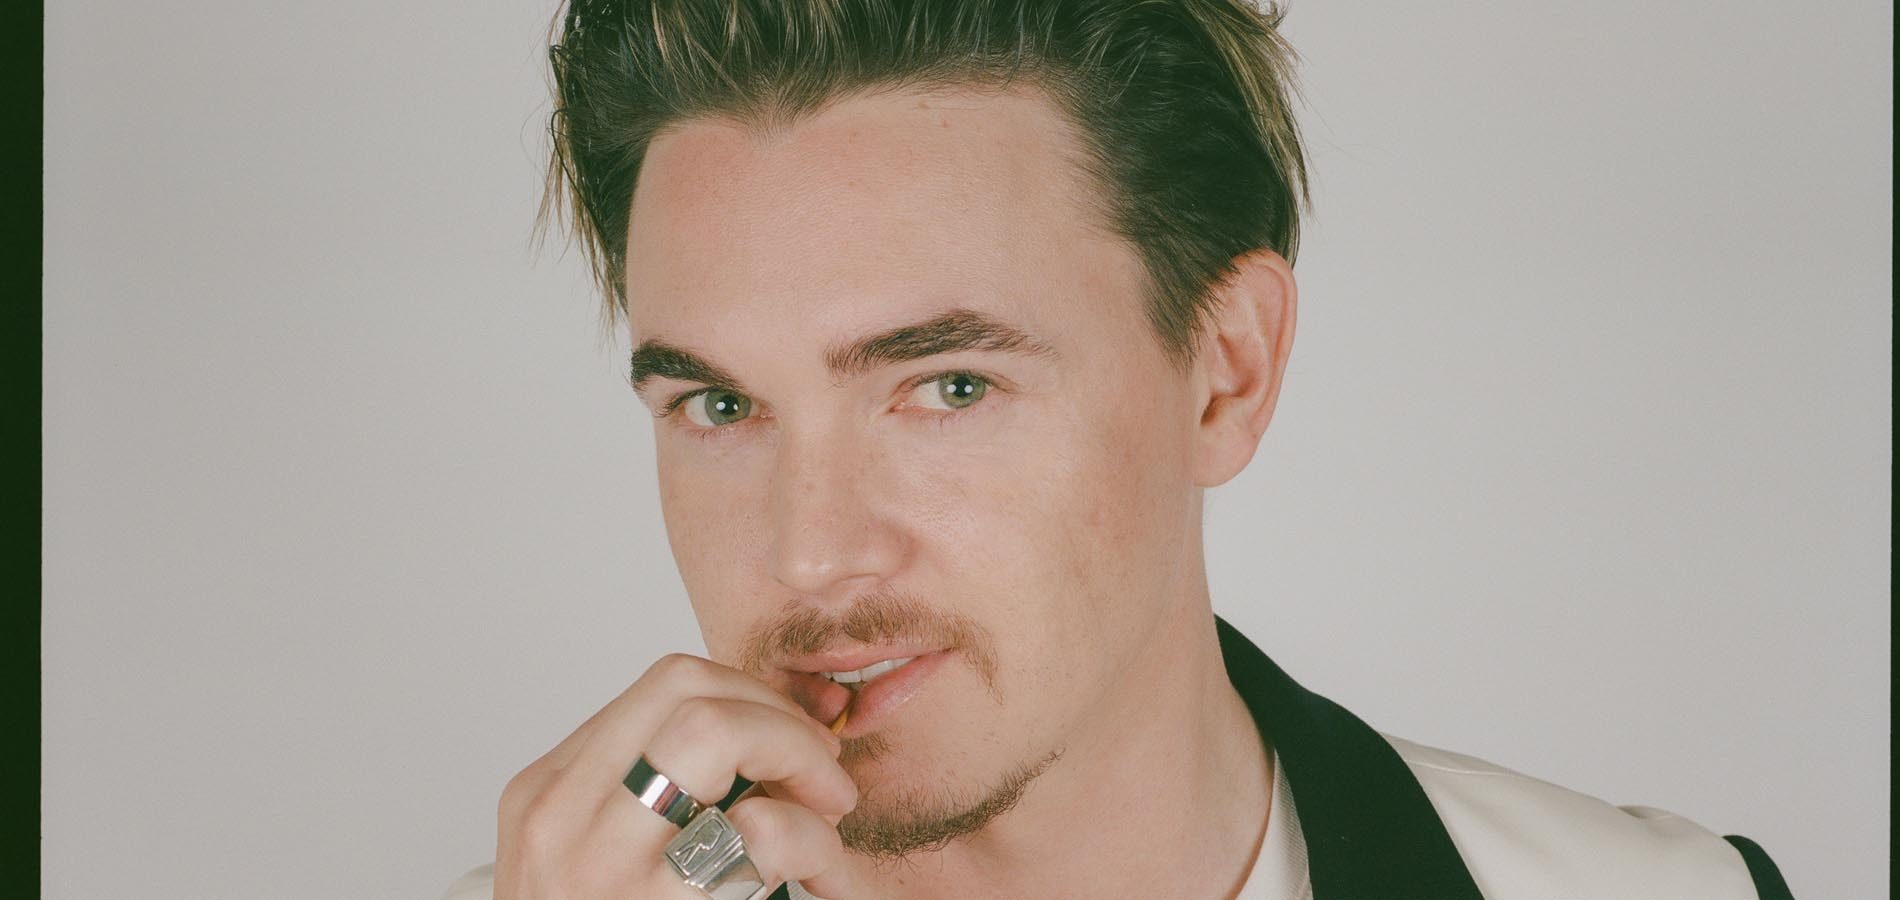 NEW DATE: Jesse McCartney – The ‘New Stage’ 2021 Tour